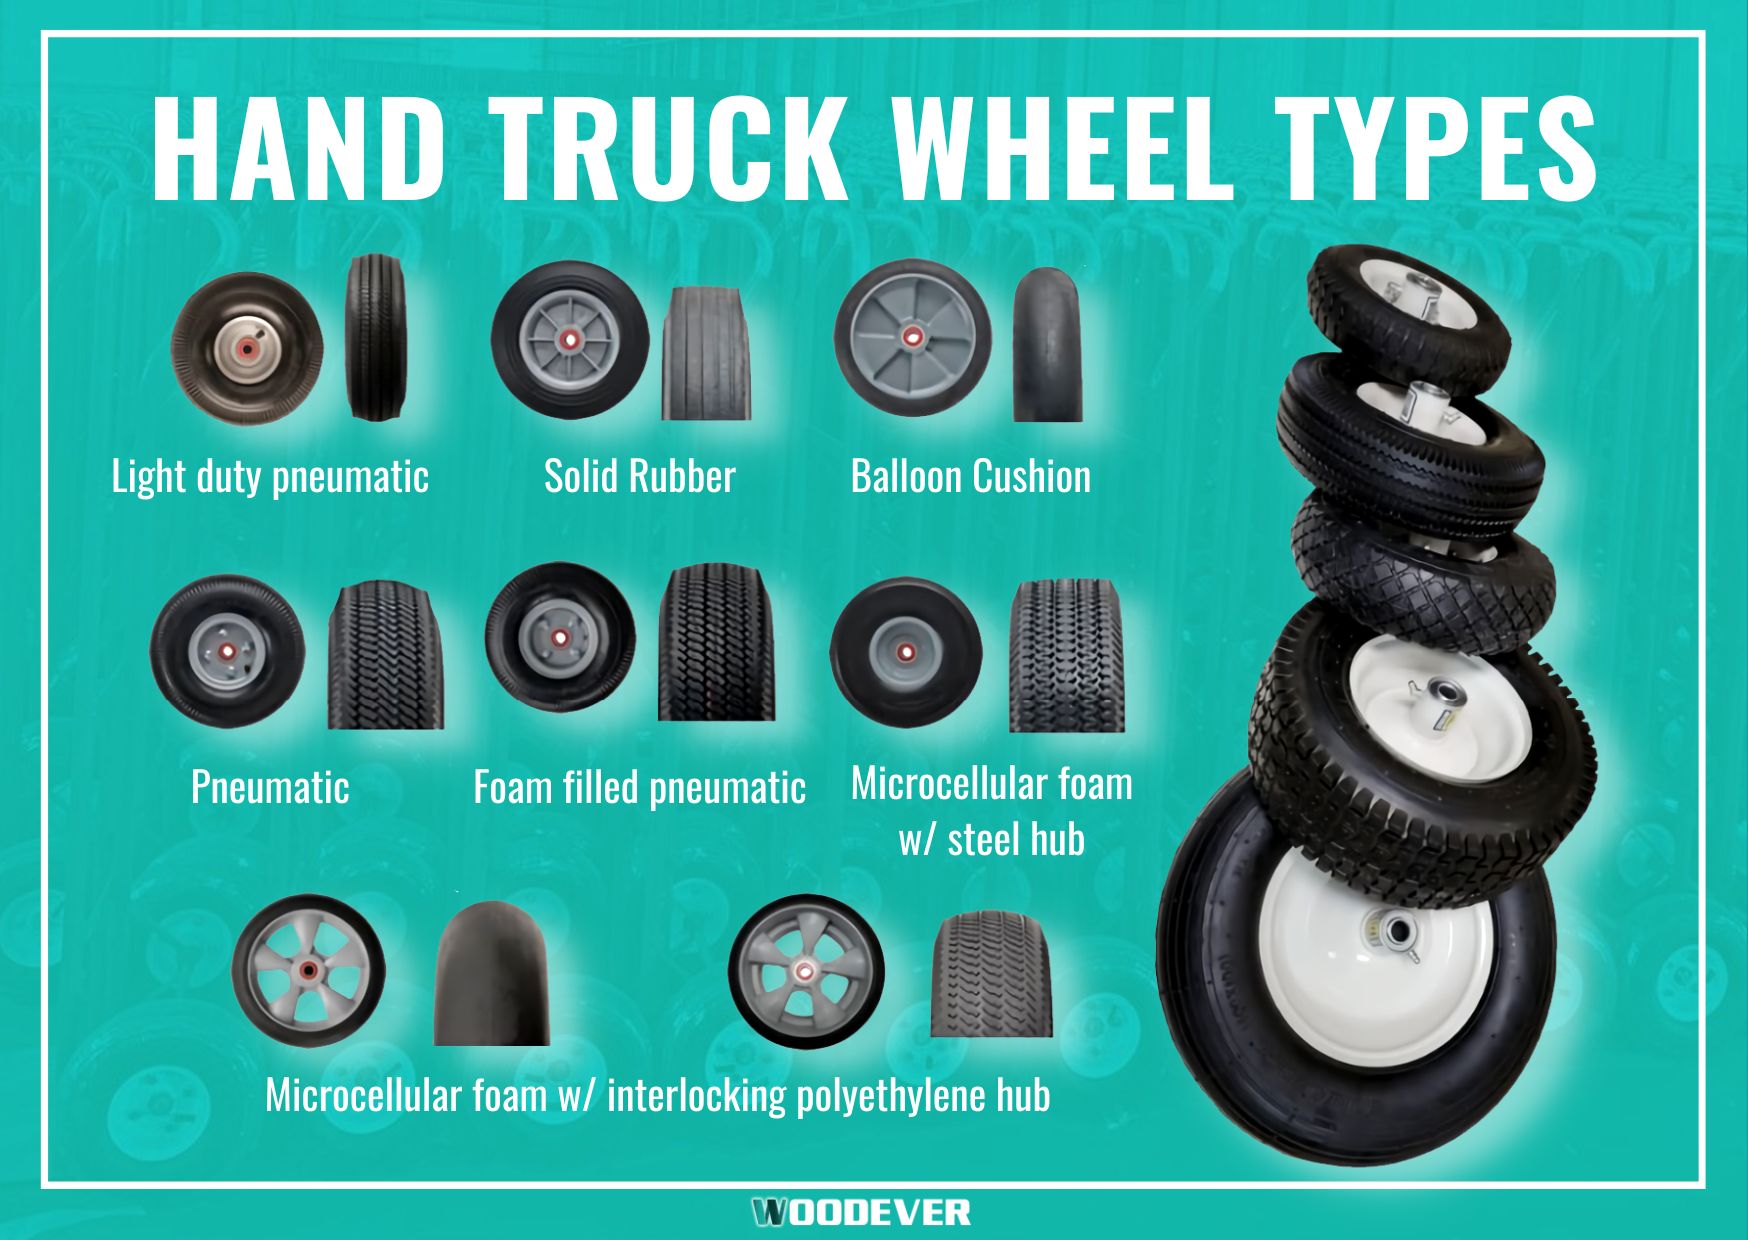 Hand truck types of wheels for handling items